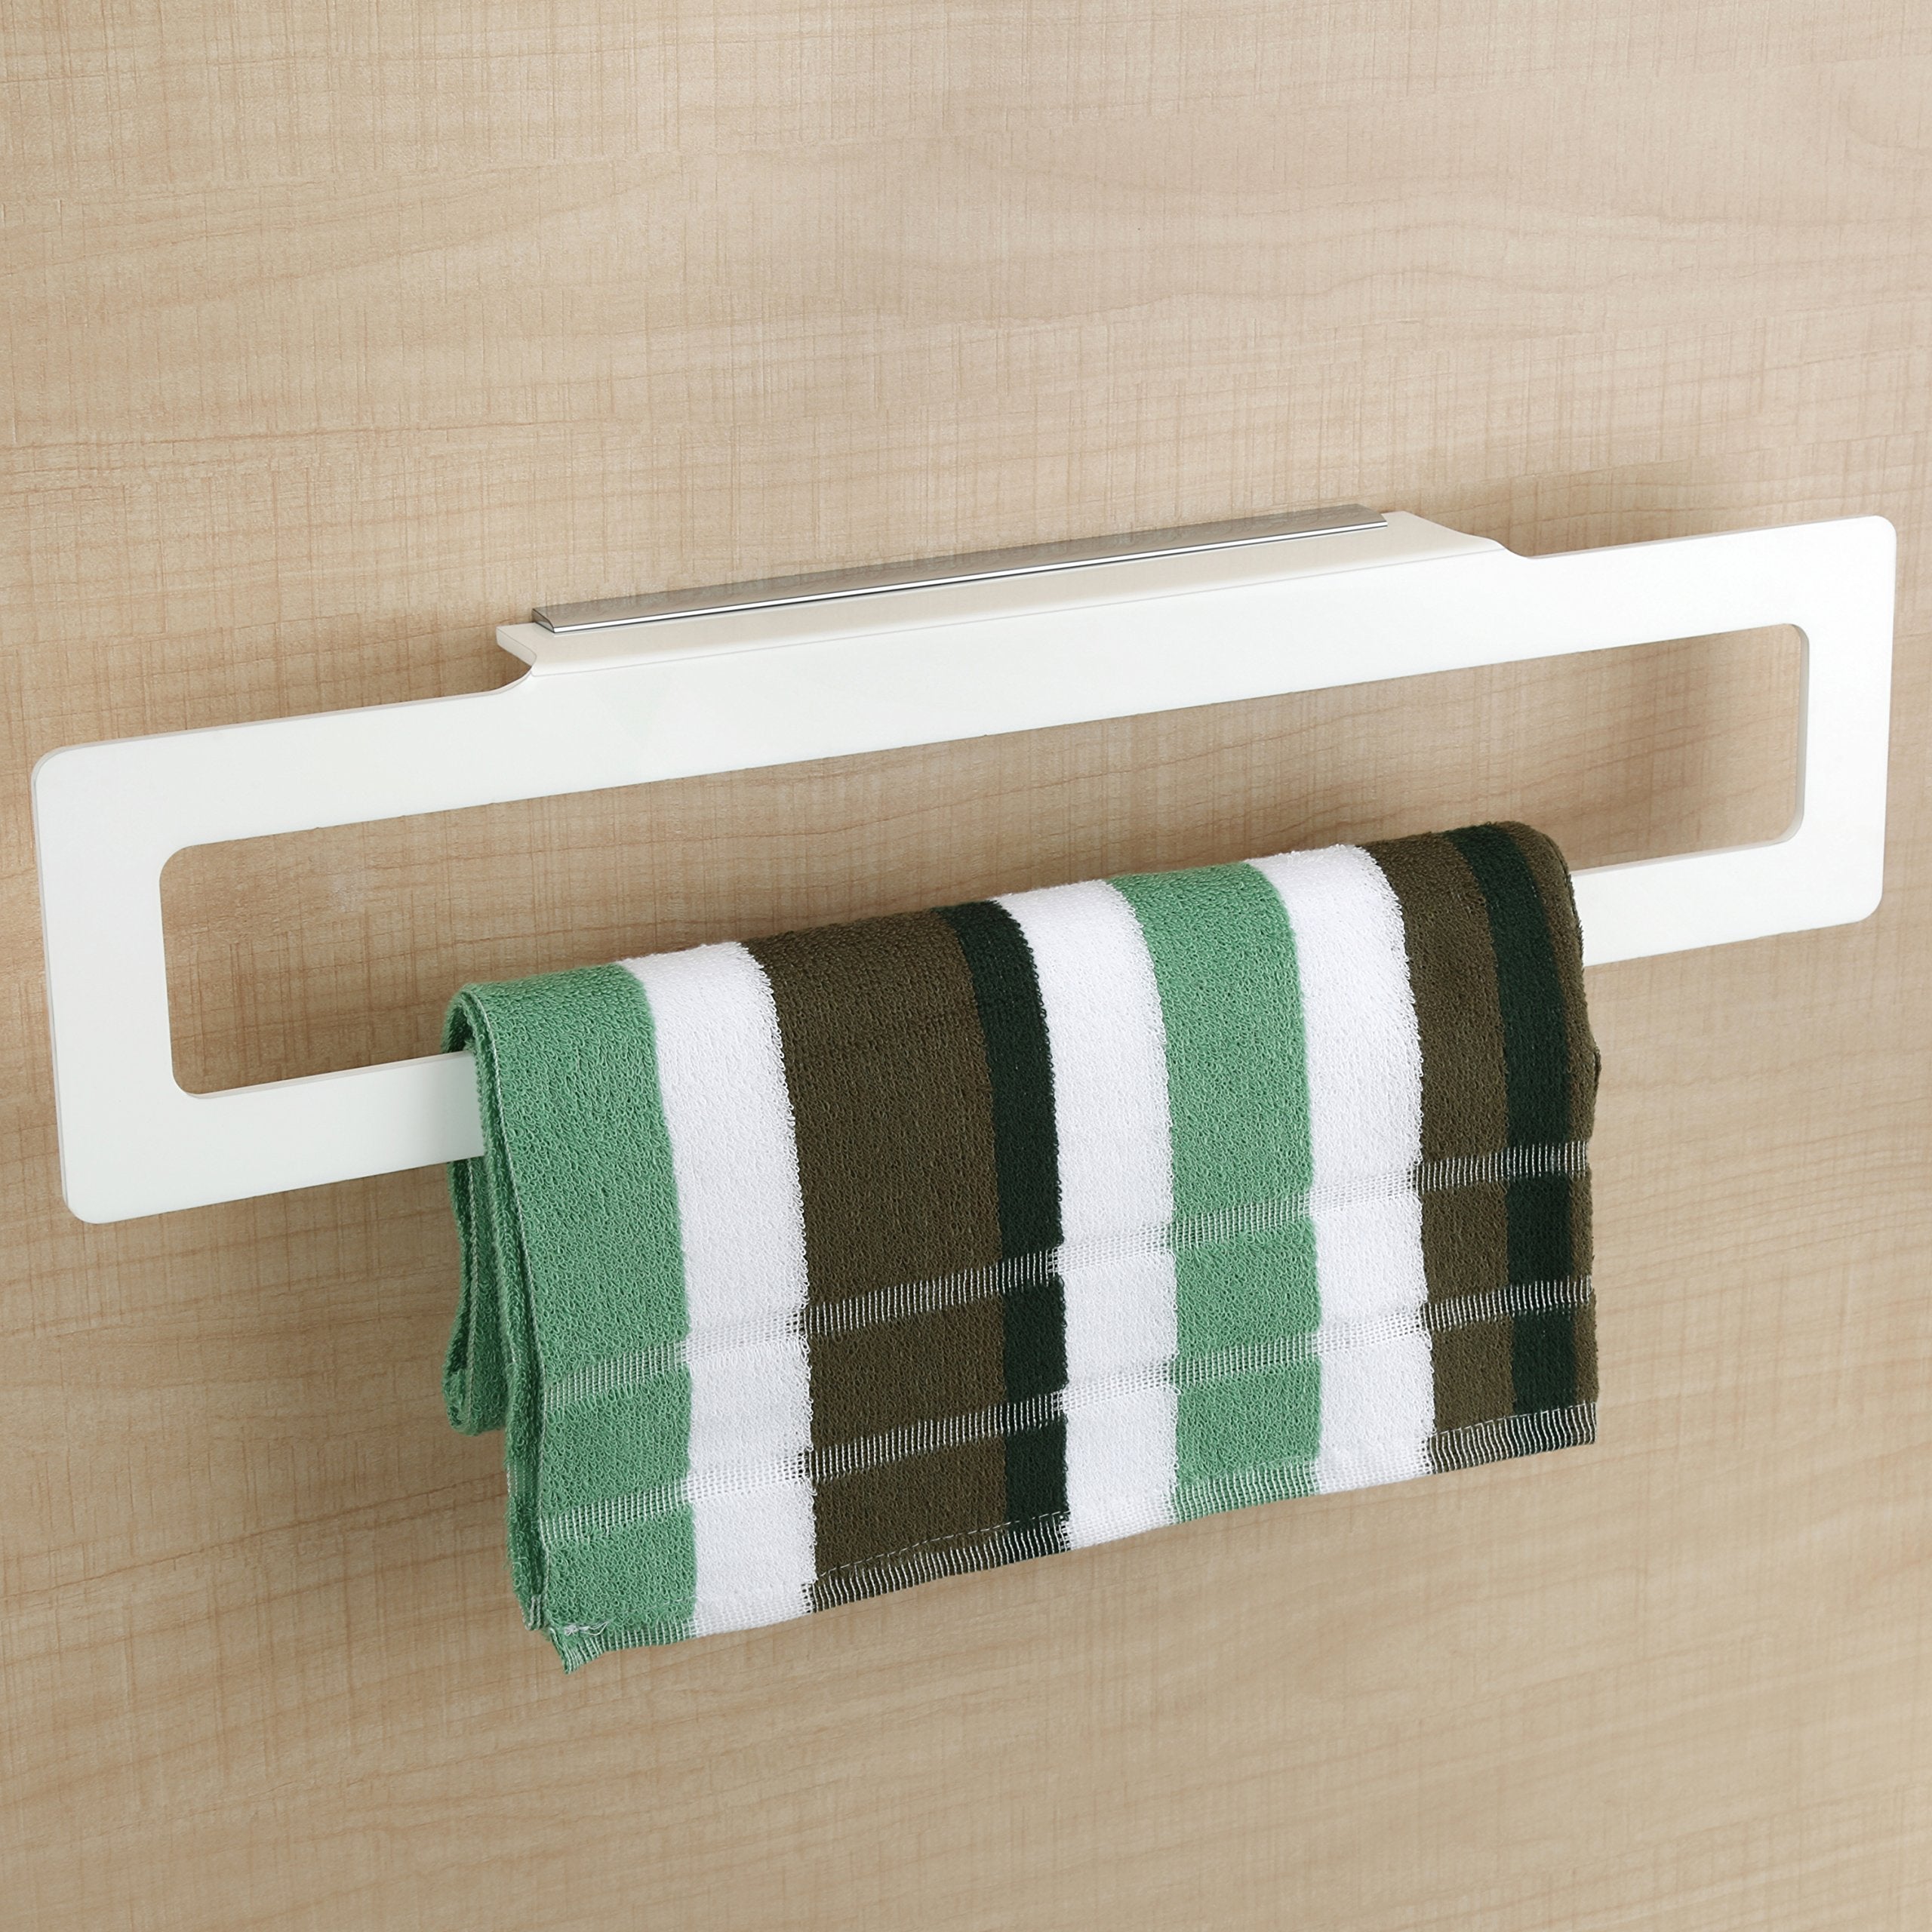 Plantex Square Acrylic Towel Rod Hanger Bathroom Accessories for Home (24 Inch, White)